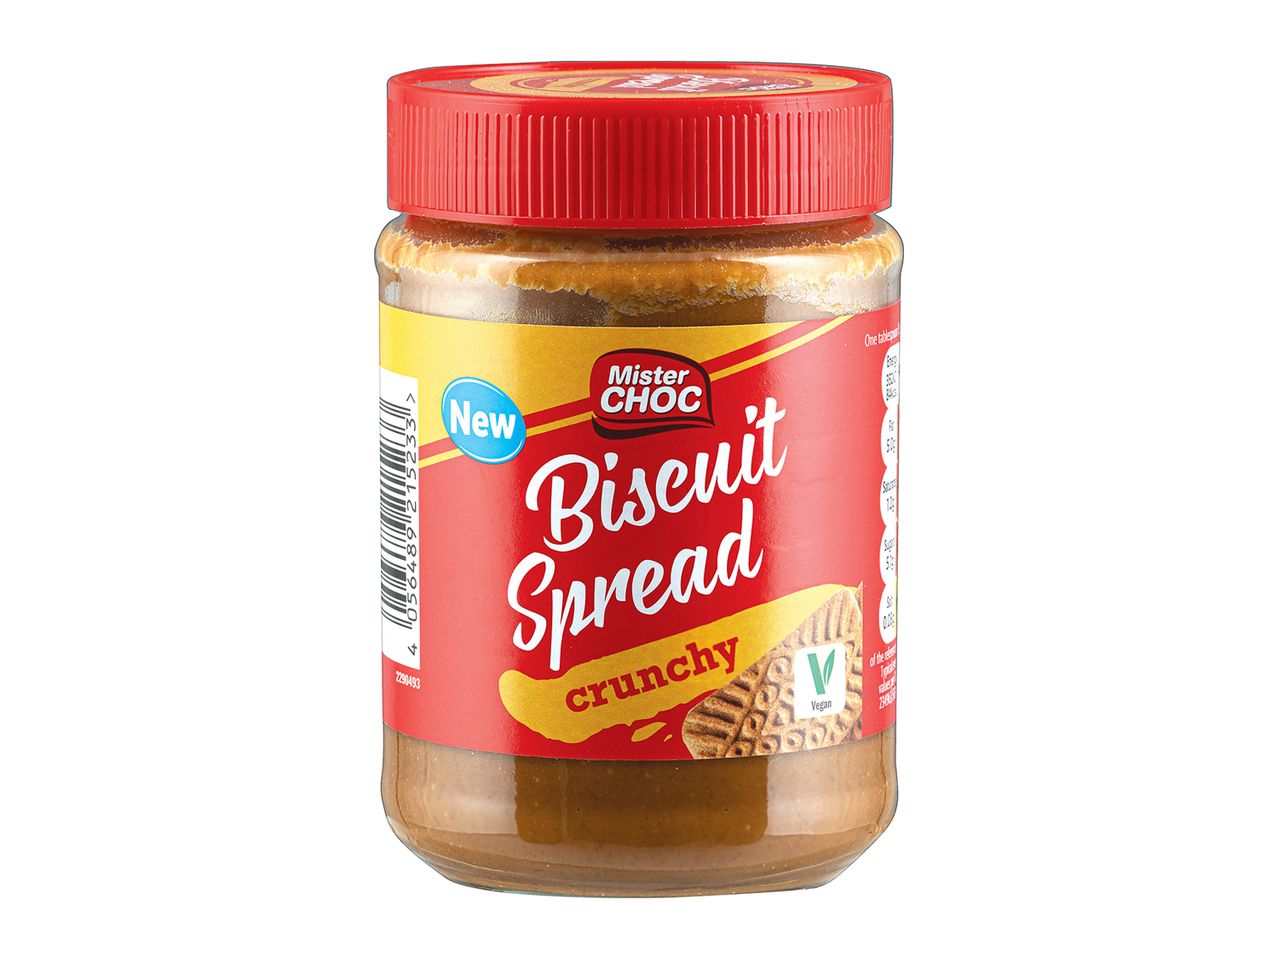 Go to full screen view: Mister Choc Biscuit Spread - Image 1